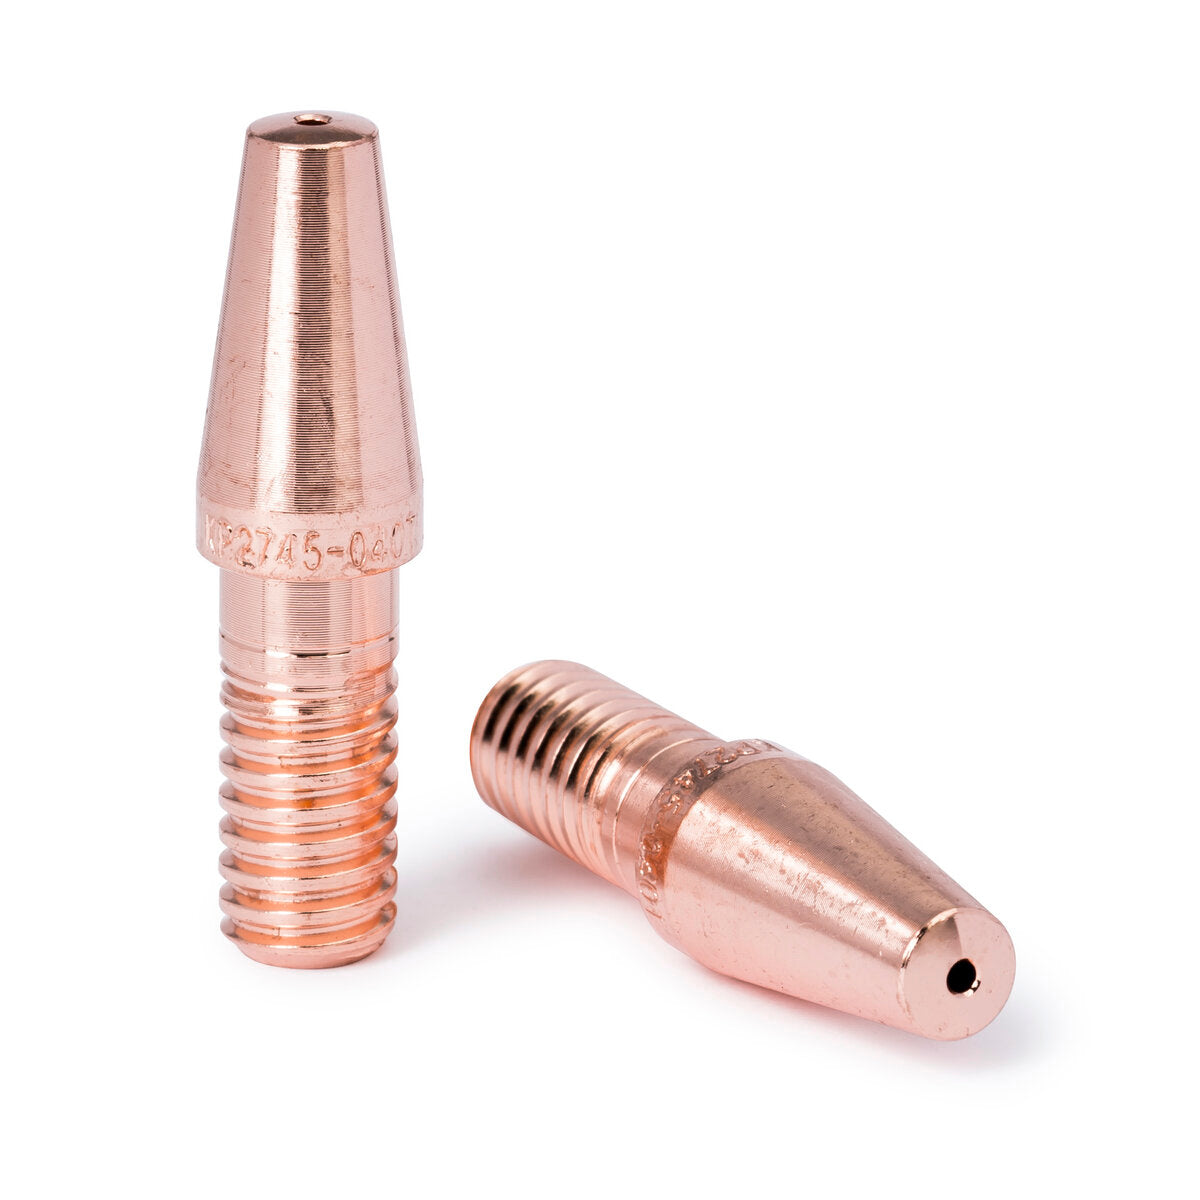 Lincoln Electric KP2745-116T-B100 Copper Plus® Contact Tip - 550A, Tapered, 1/16 in (100/pack)